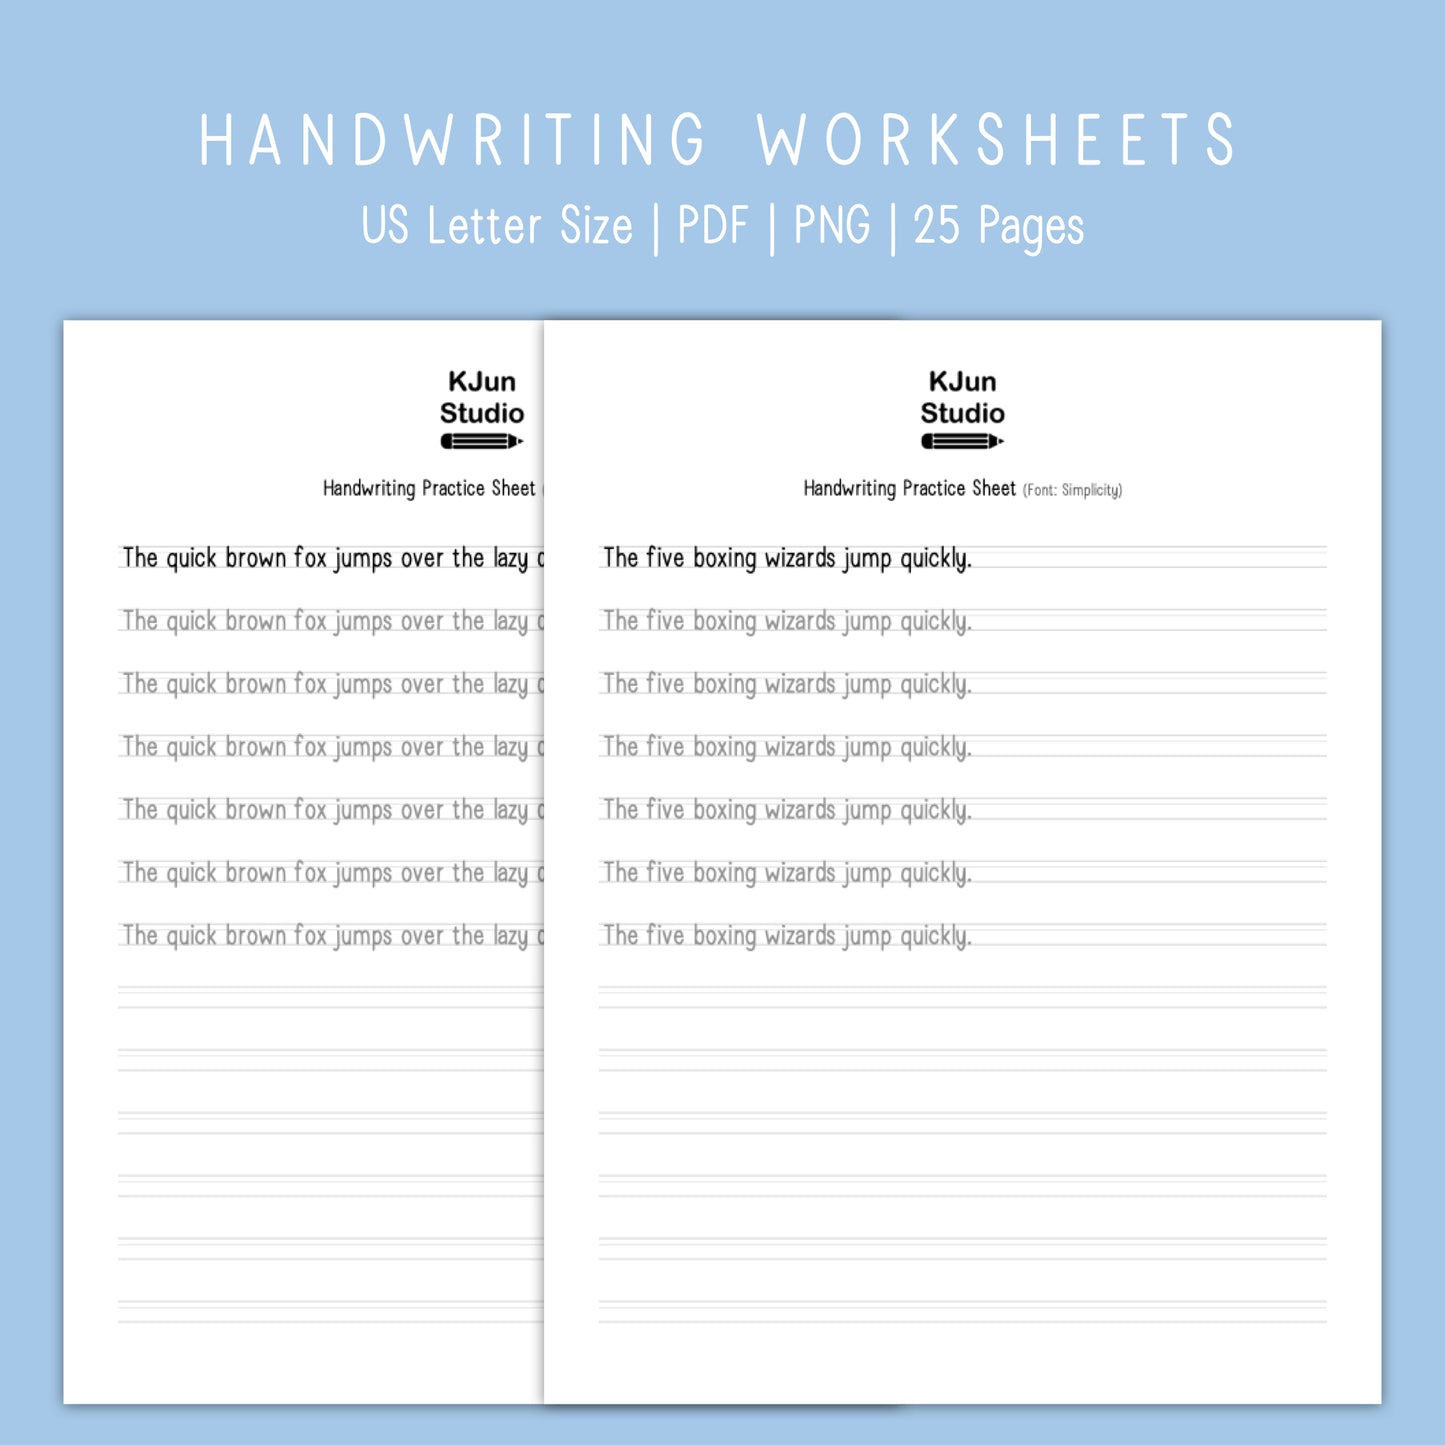 Handwriting Practice Sheets - Simplicity Font